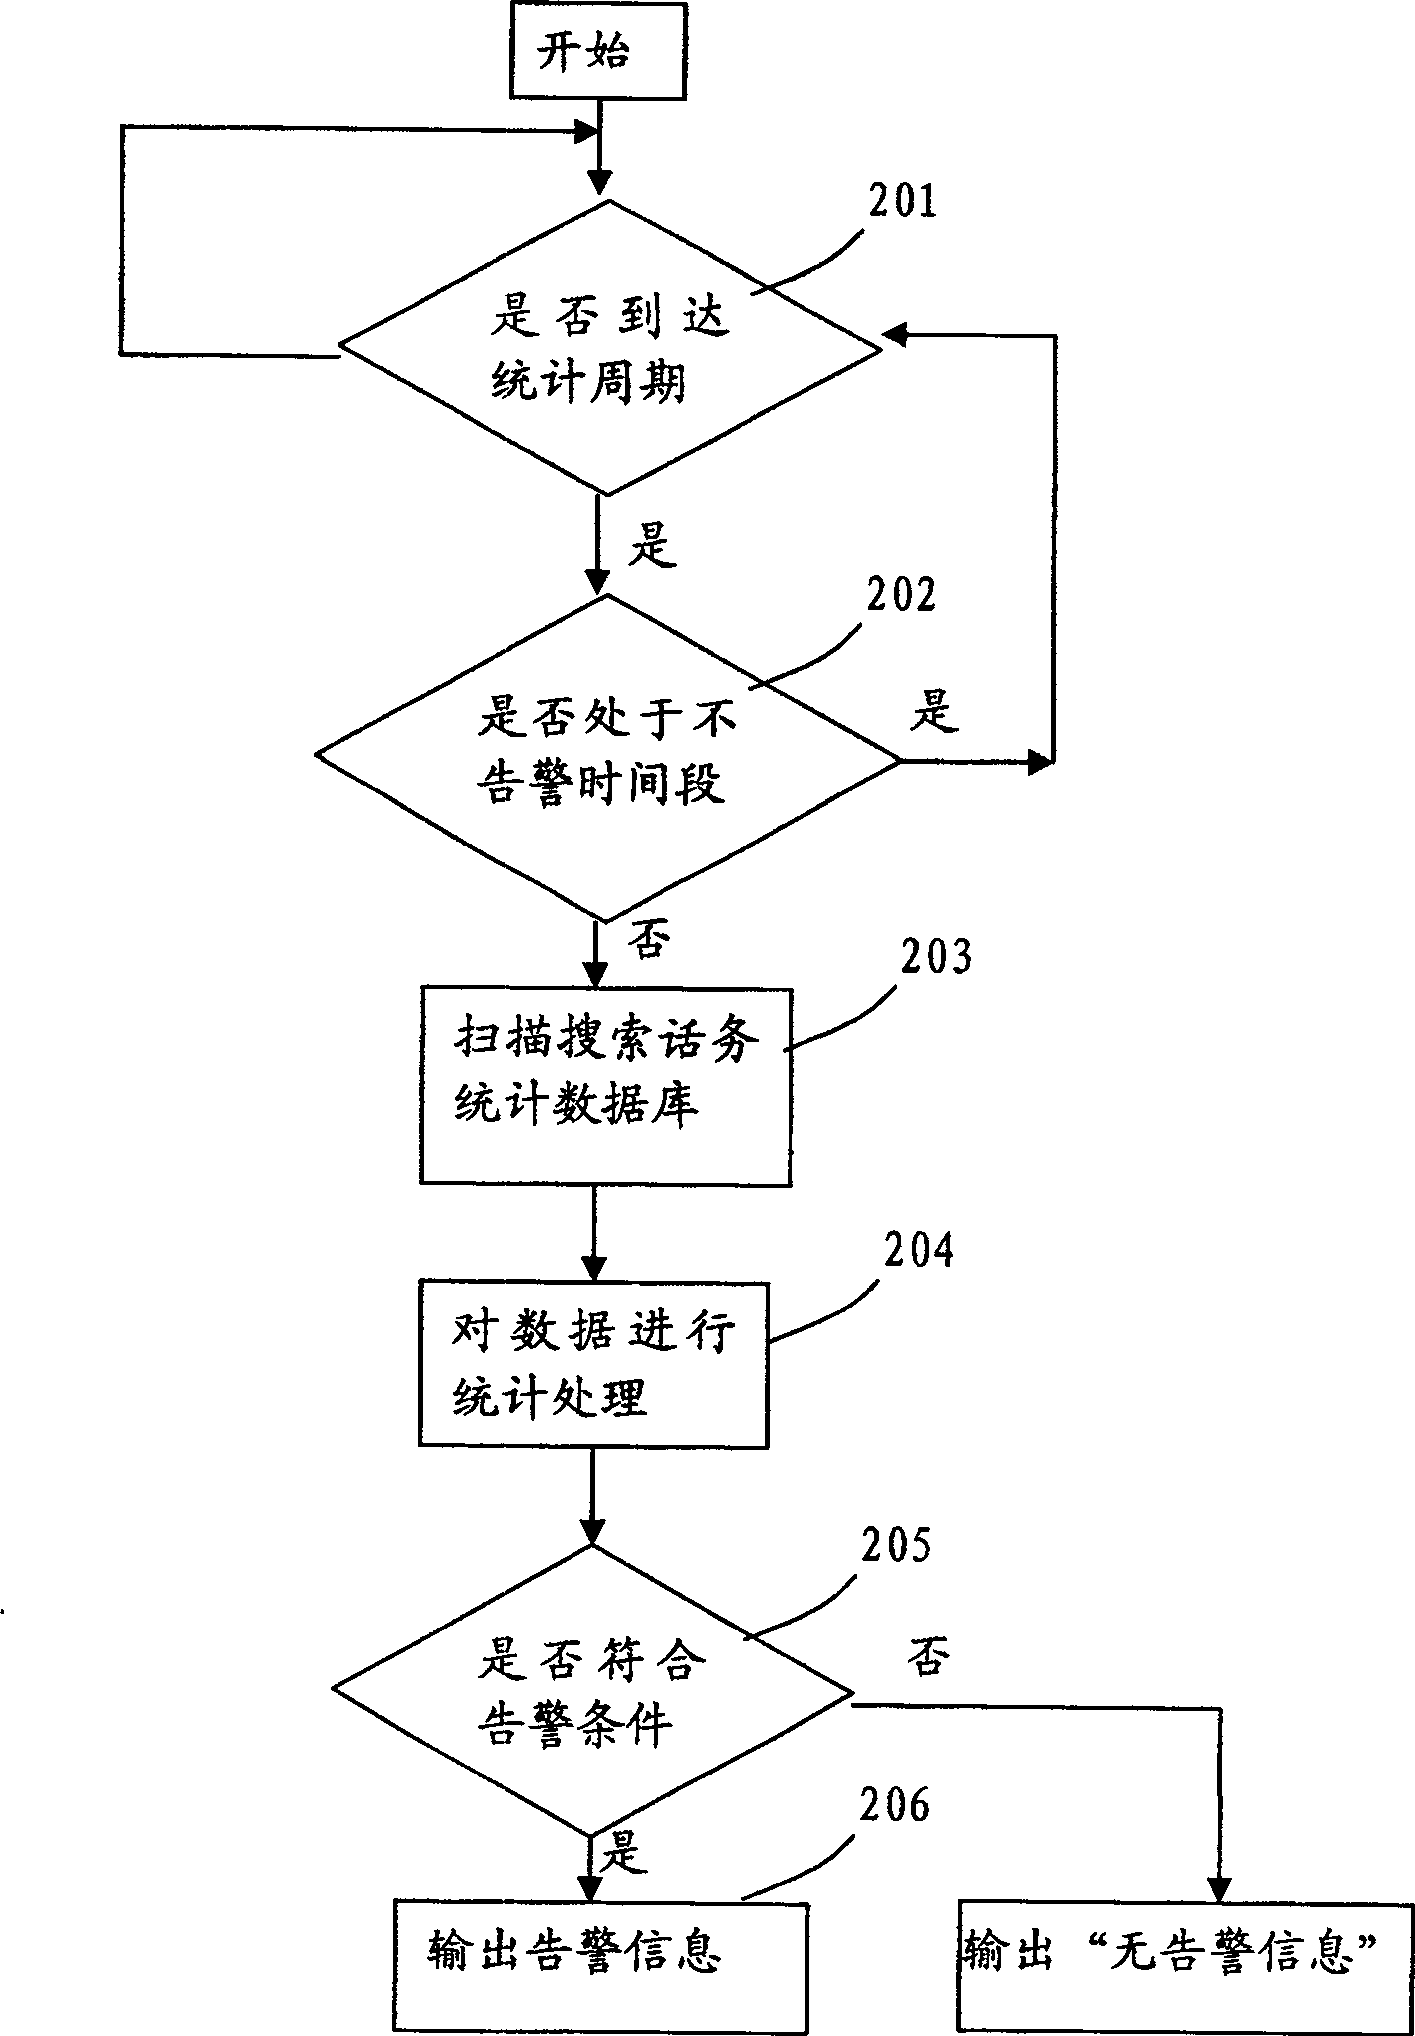 Method and device for warning network property